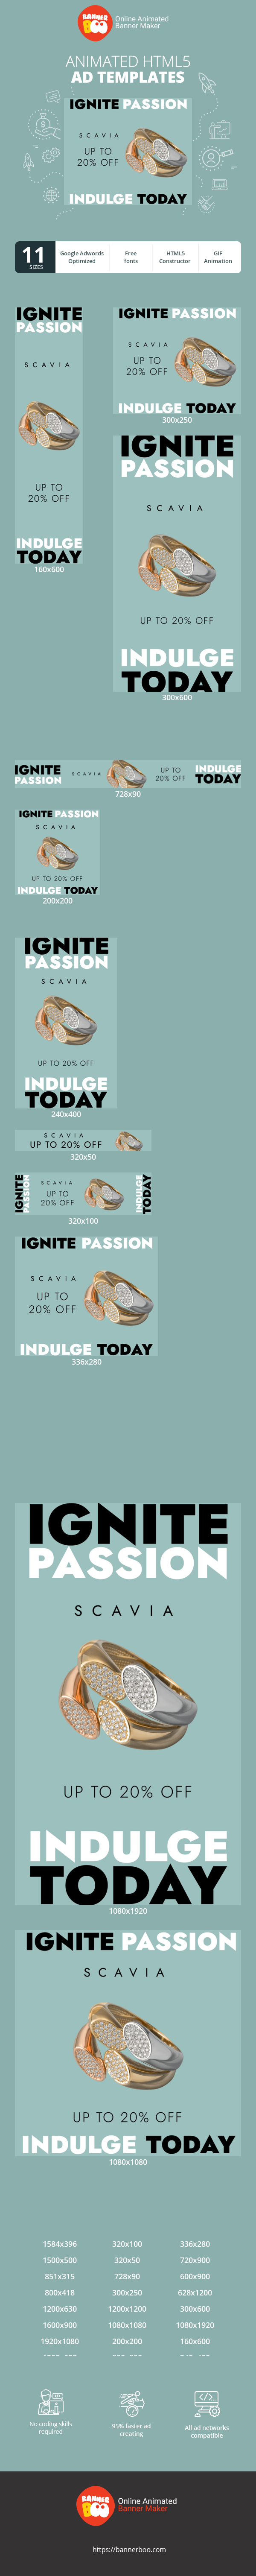 Banner ad template — Ignite Passion Indulge Today Up To 20% Off — Jewelry